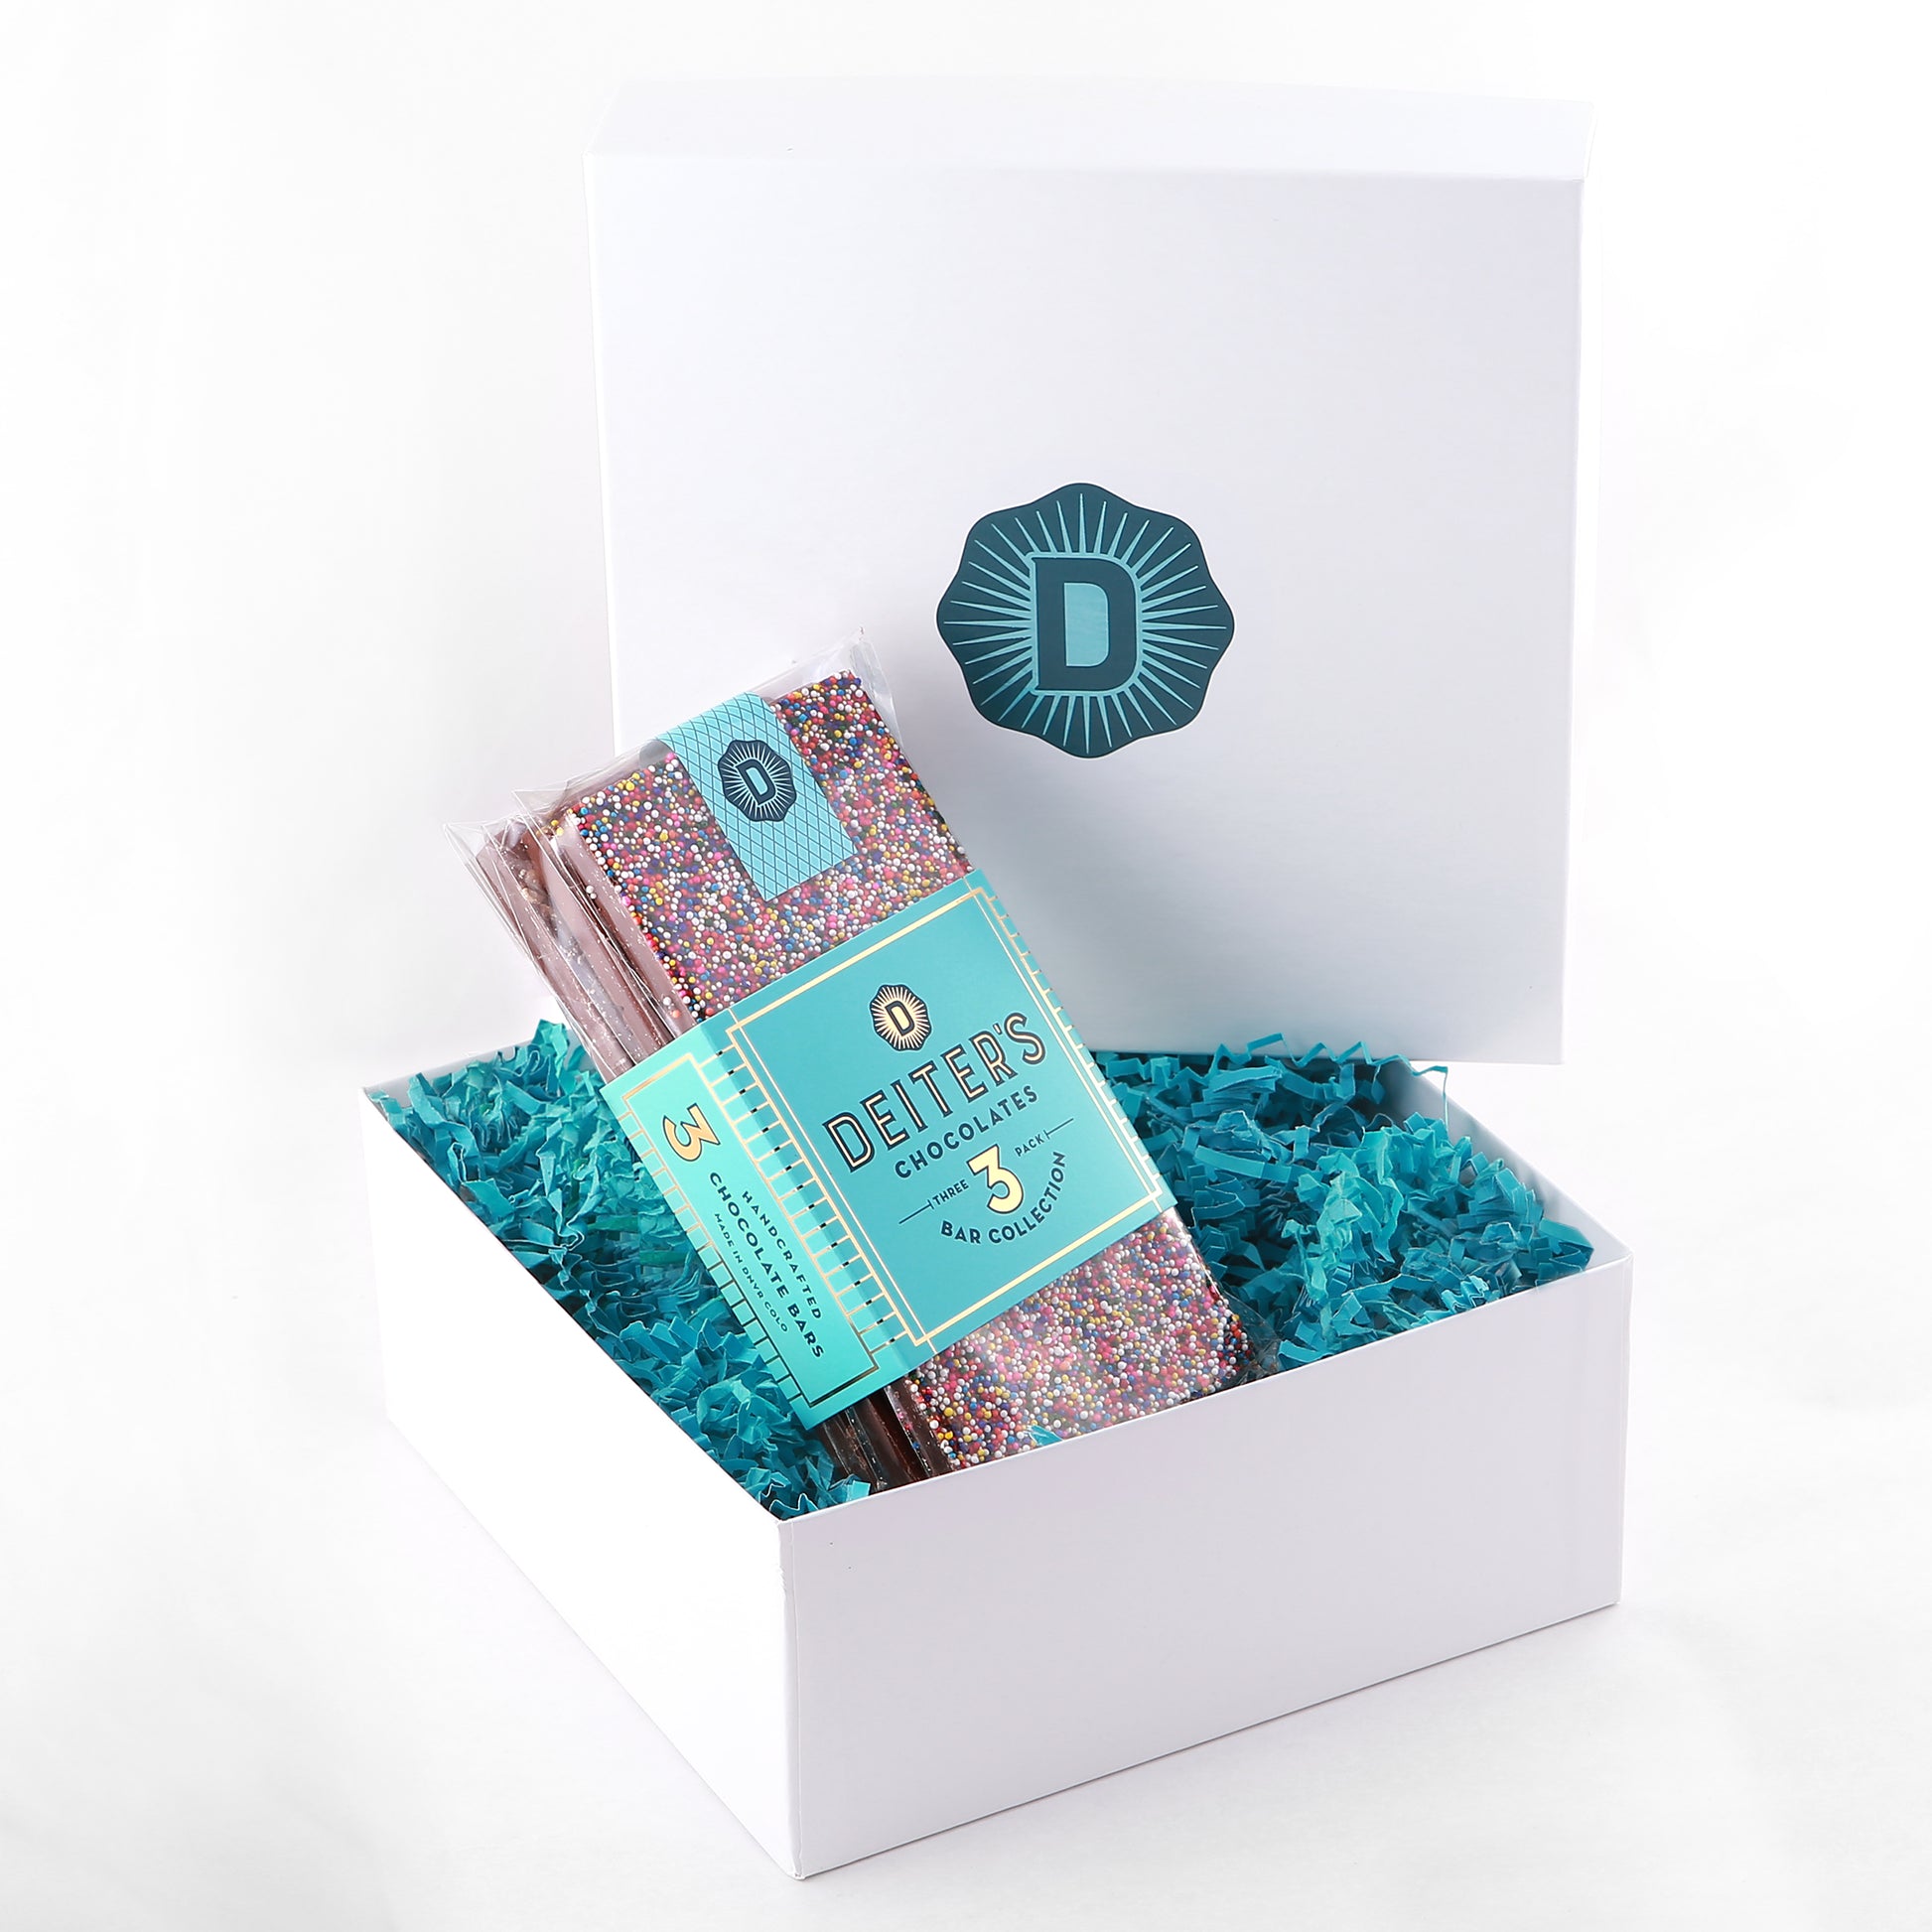 gift box with packaged set of 3 Deiter's bars